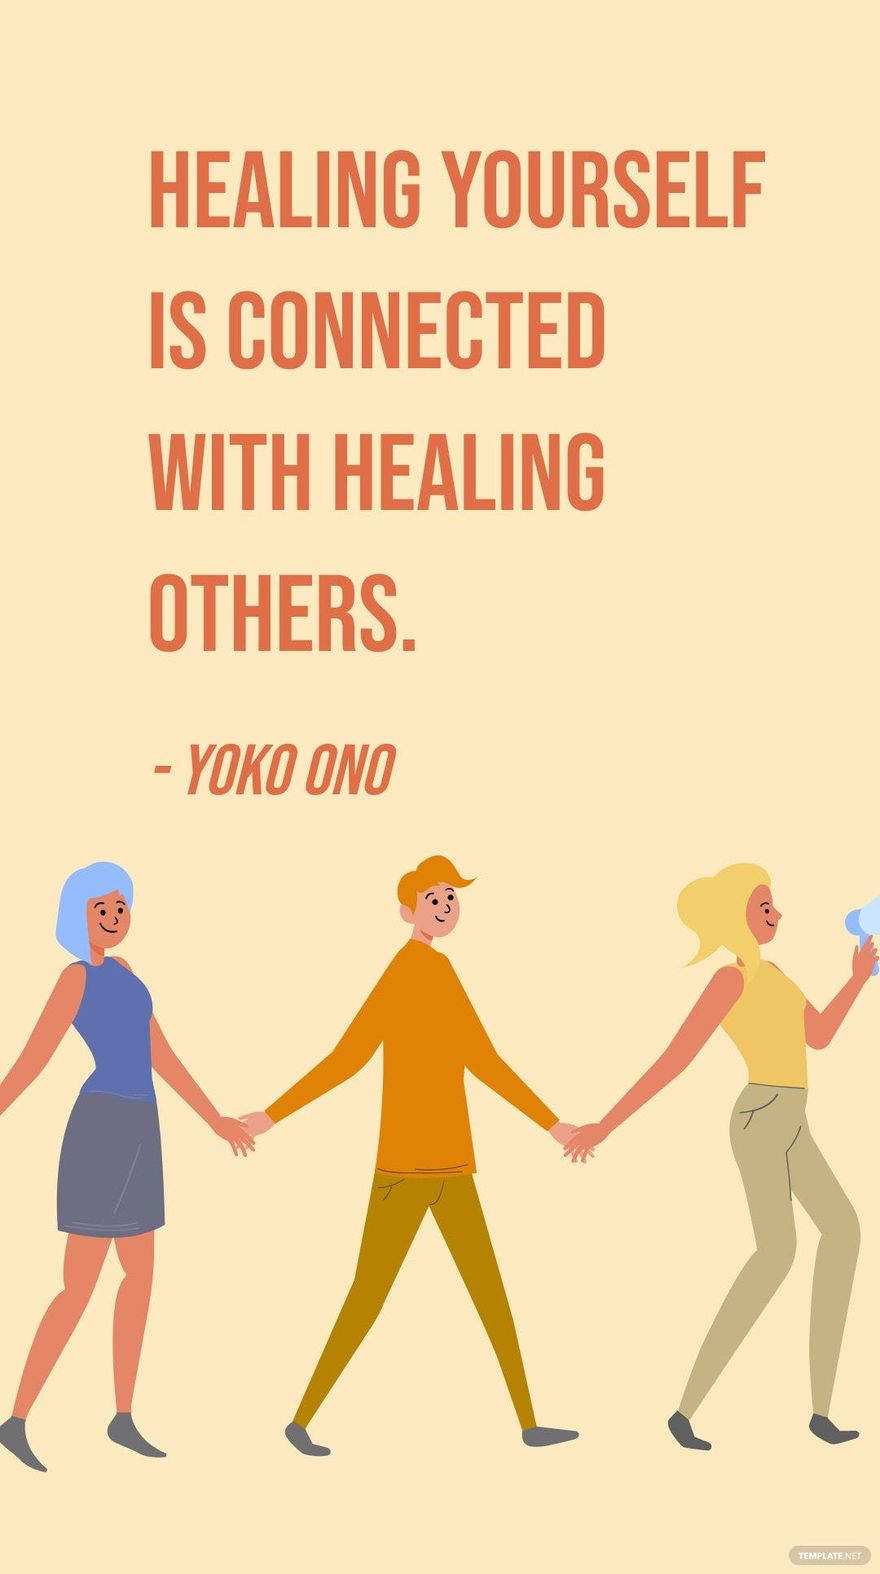 Free Yoko Ono - Healing yourself is connected with healing others.